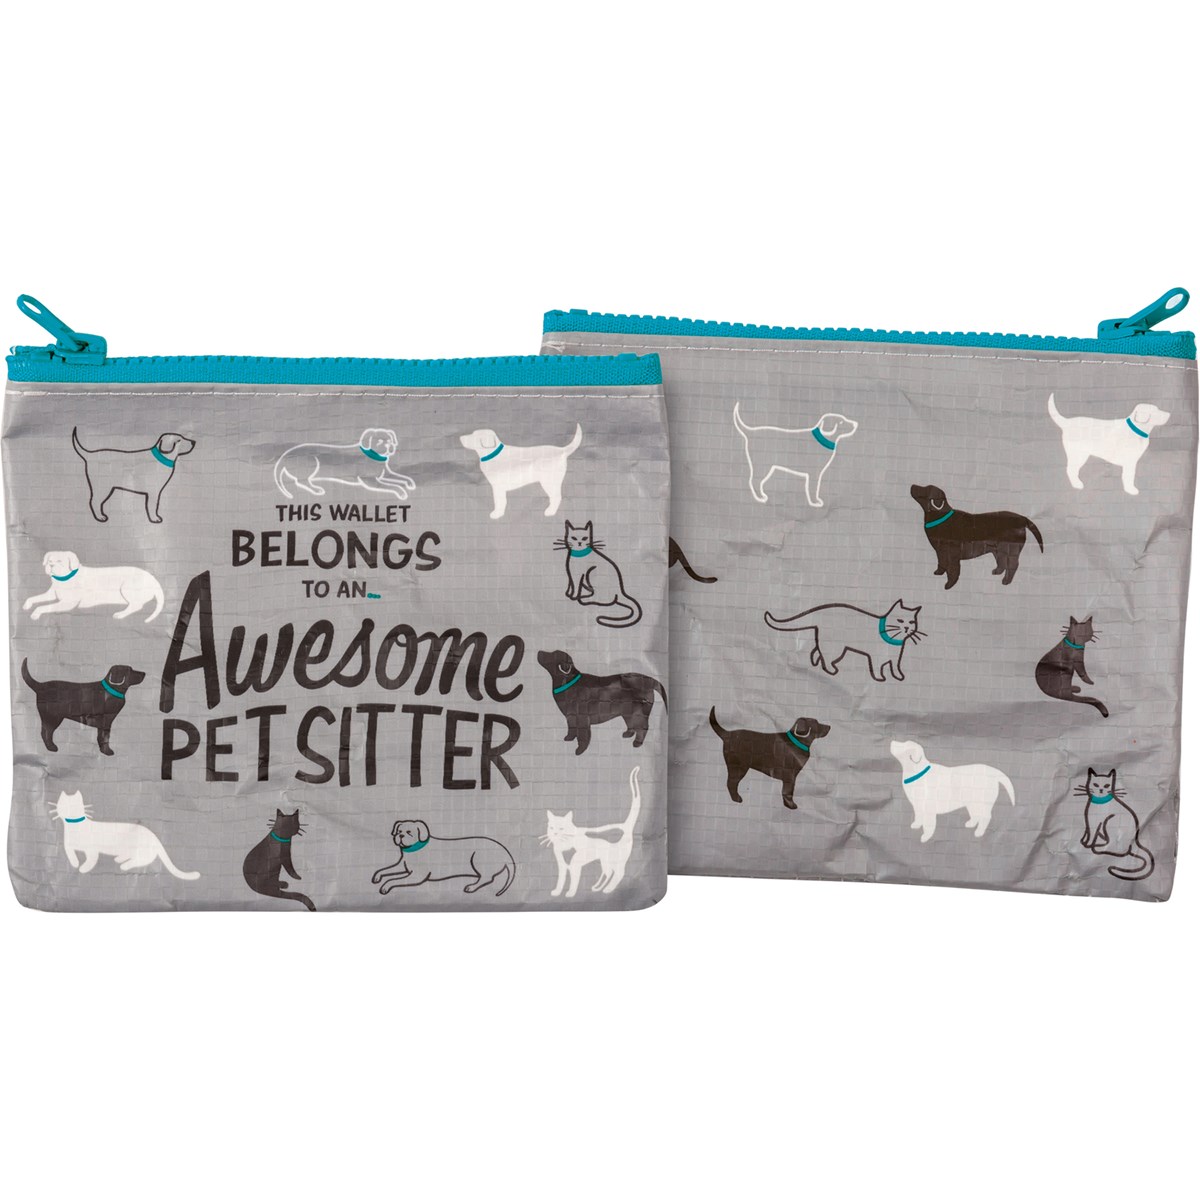 Awesome Pet Sitter Zipper Wallet - Post-Consumer Material, Plastic, Metal